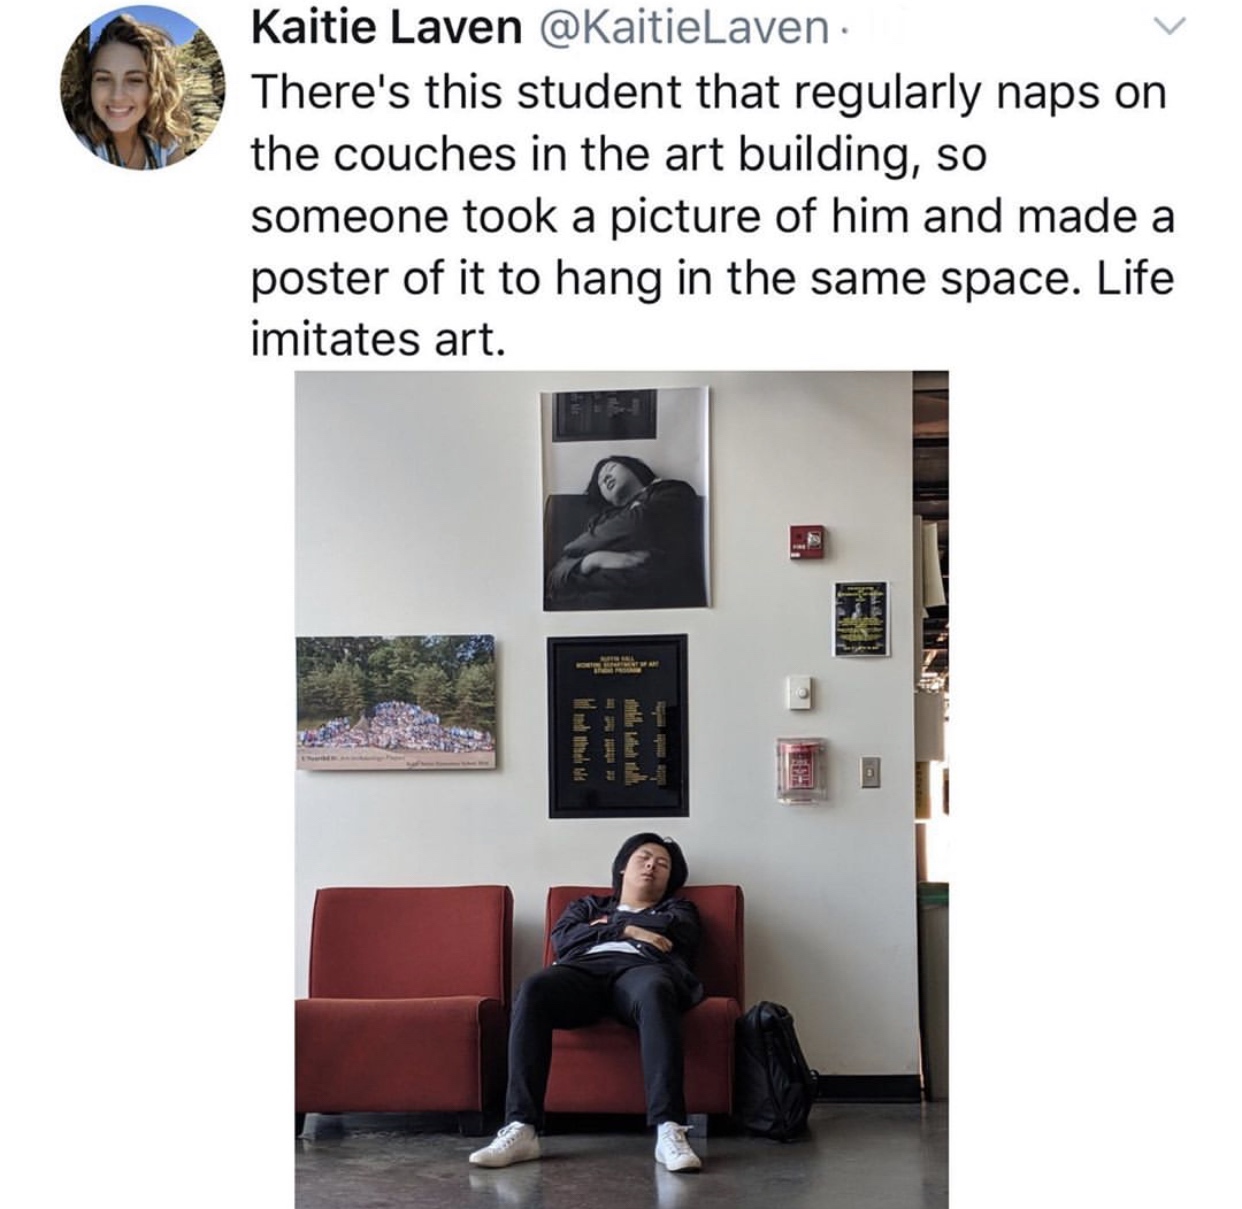 Nap - Kaitie Laven There's this student that regularly naps on the couches in the art building, so someone took a picture of him and made a poster of it to hang in the same space. Life imitates art. W ndi theel